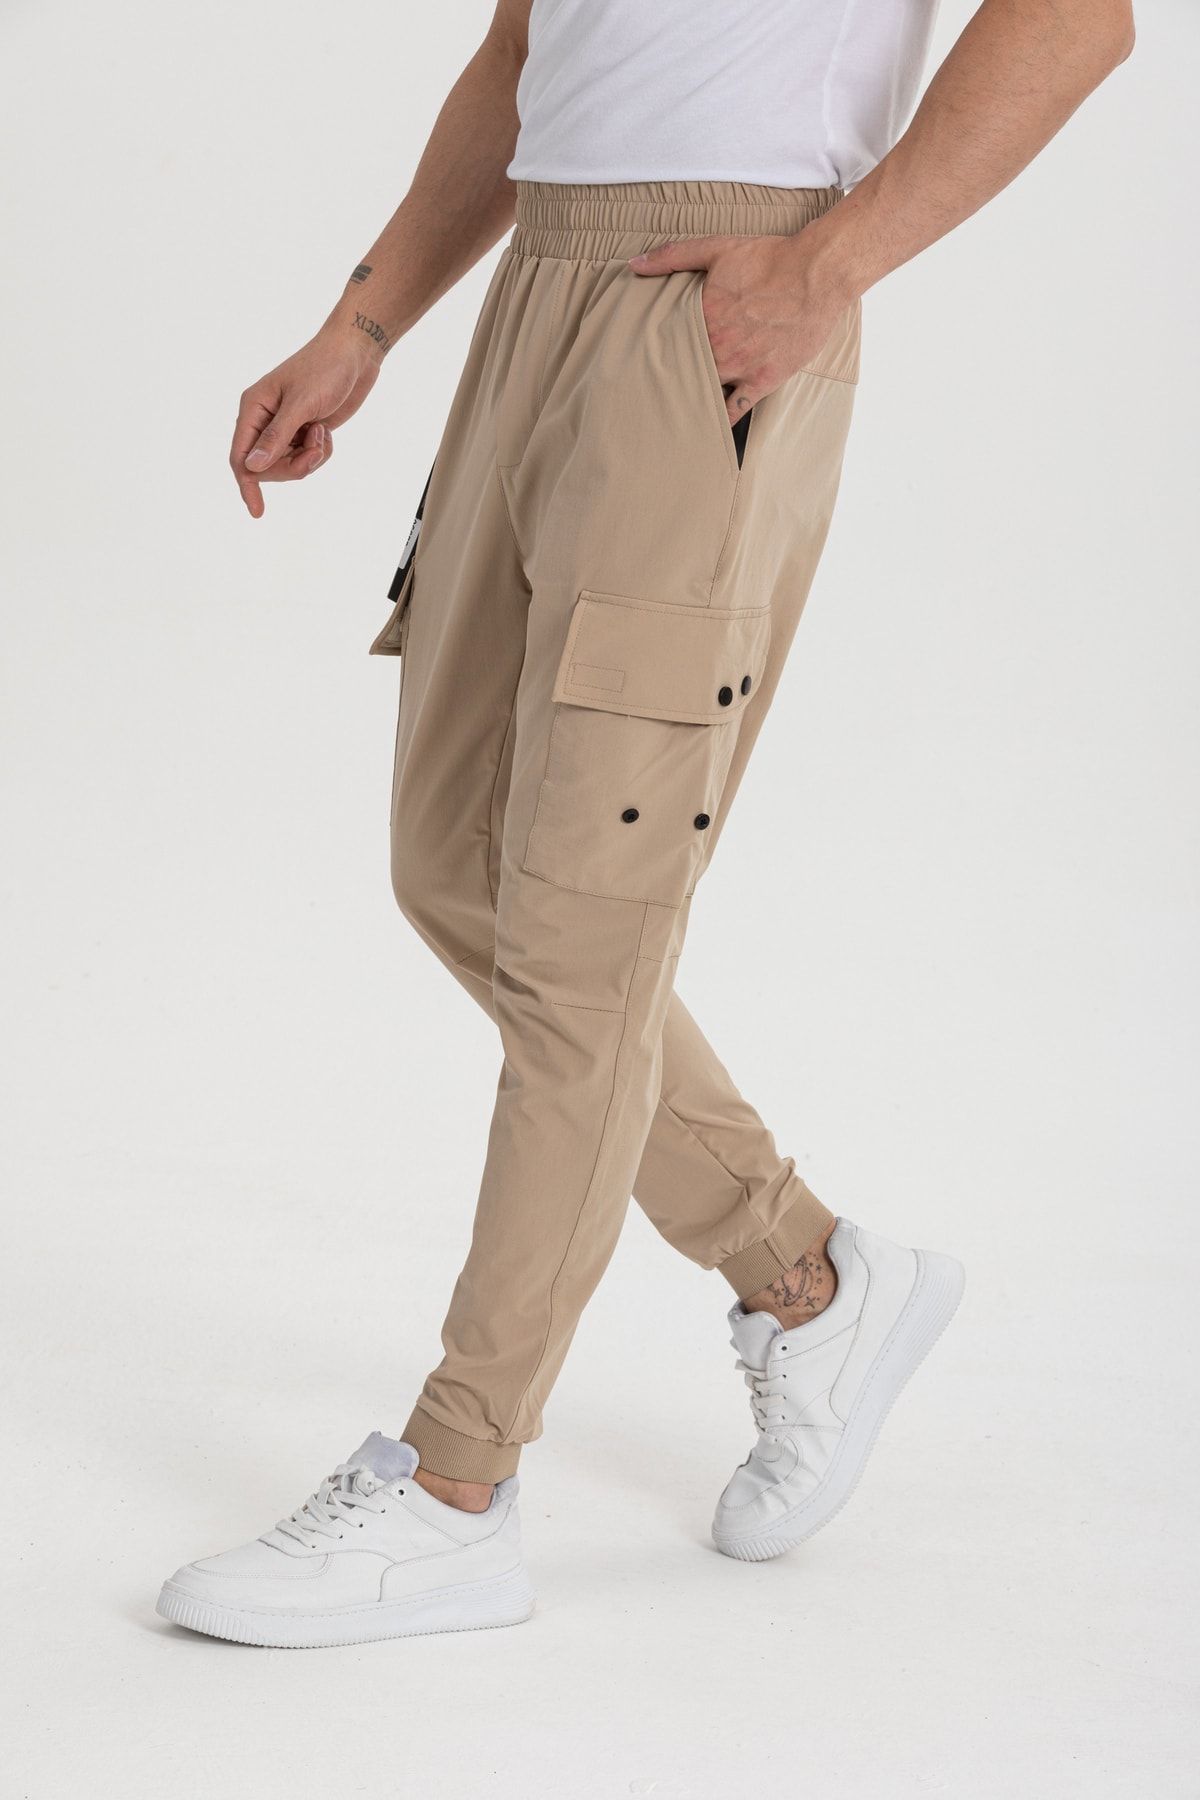 Cargo trousers with contrast details - Trousers - Bershka United Kingdom | Cargo  trousers, Adaptive clothing, Mens trousers